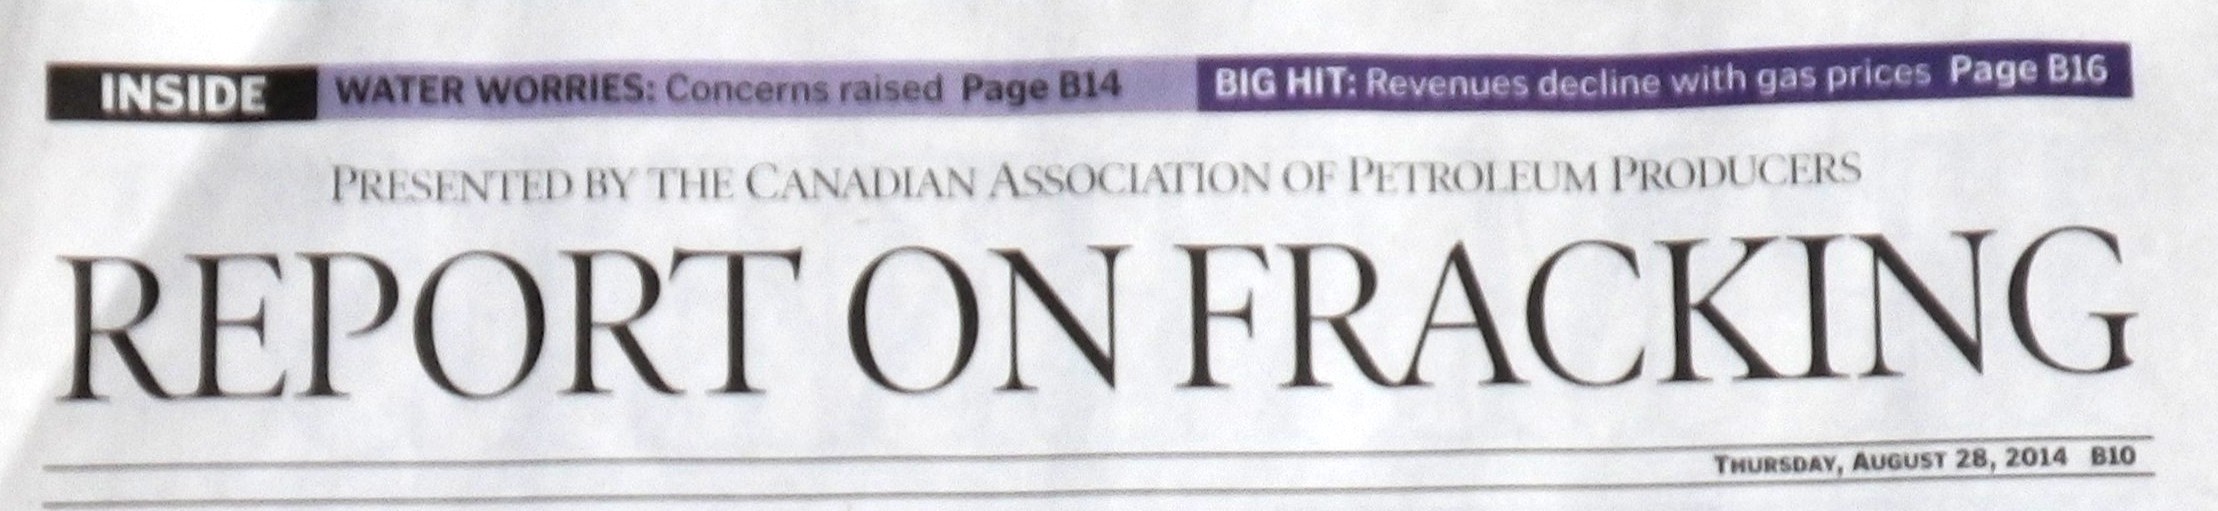 2014 08 28 Calgary Herald Report on Fracking 'Presented by the Canadian Association of Petroleum Producers'